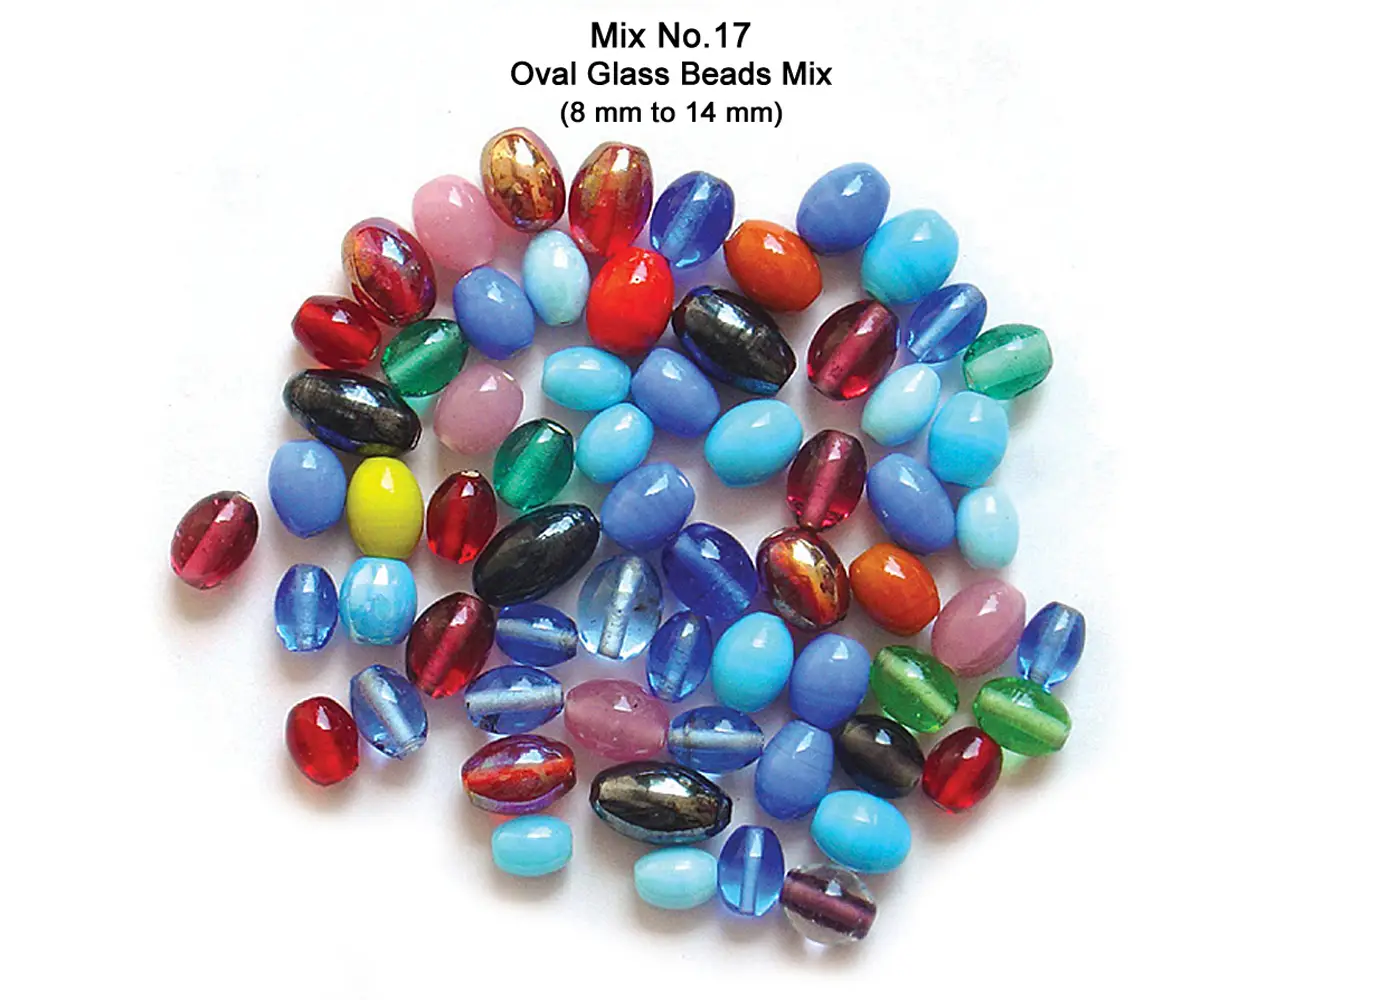 Oval Glass Beads Mix (8 mm to 14 mm)